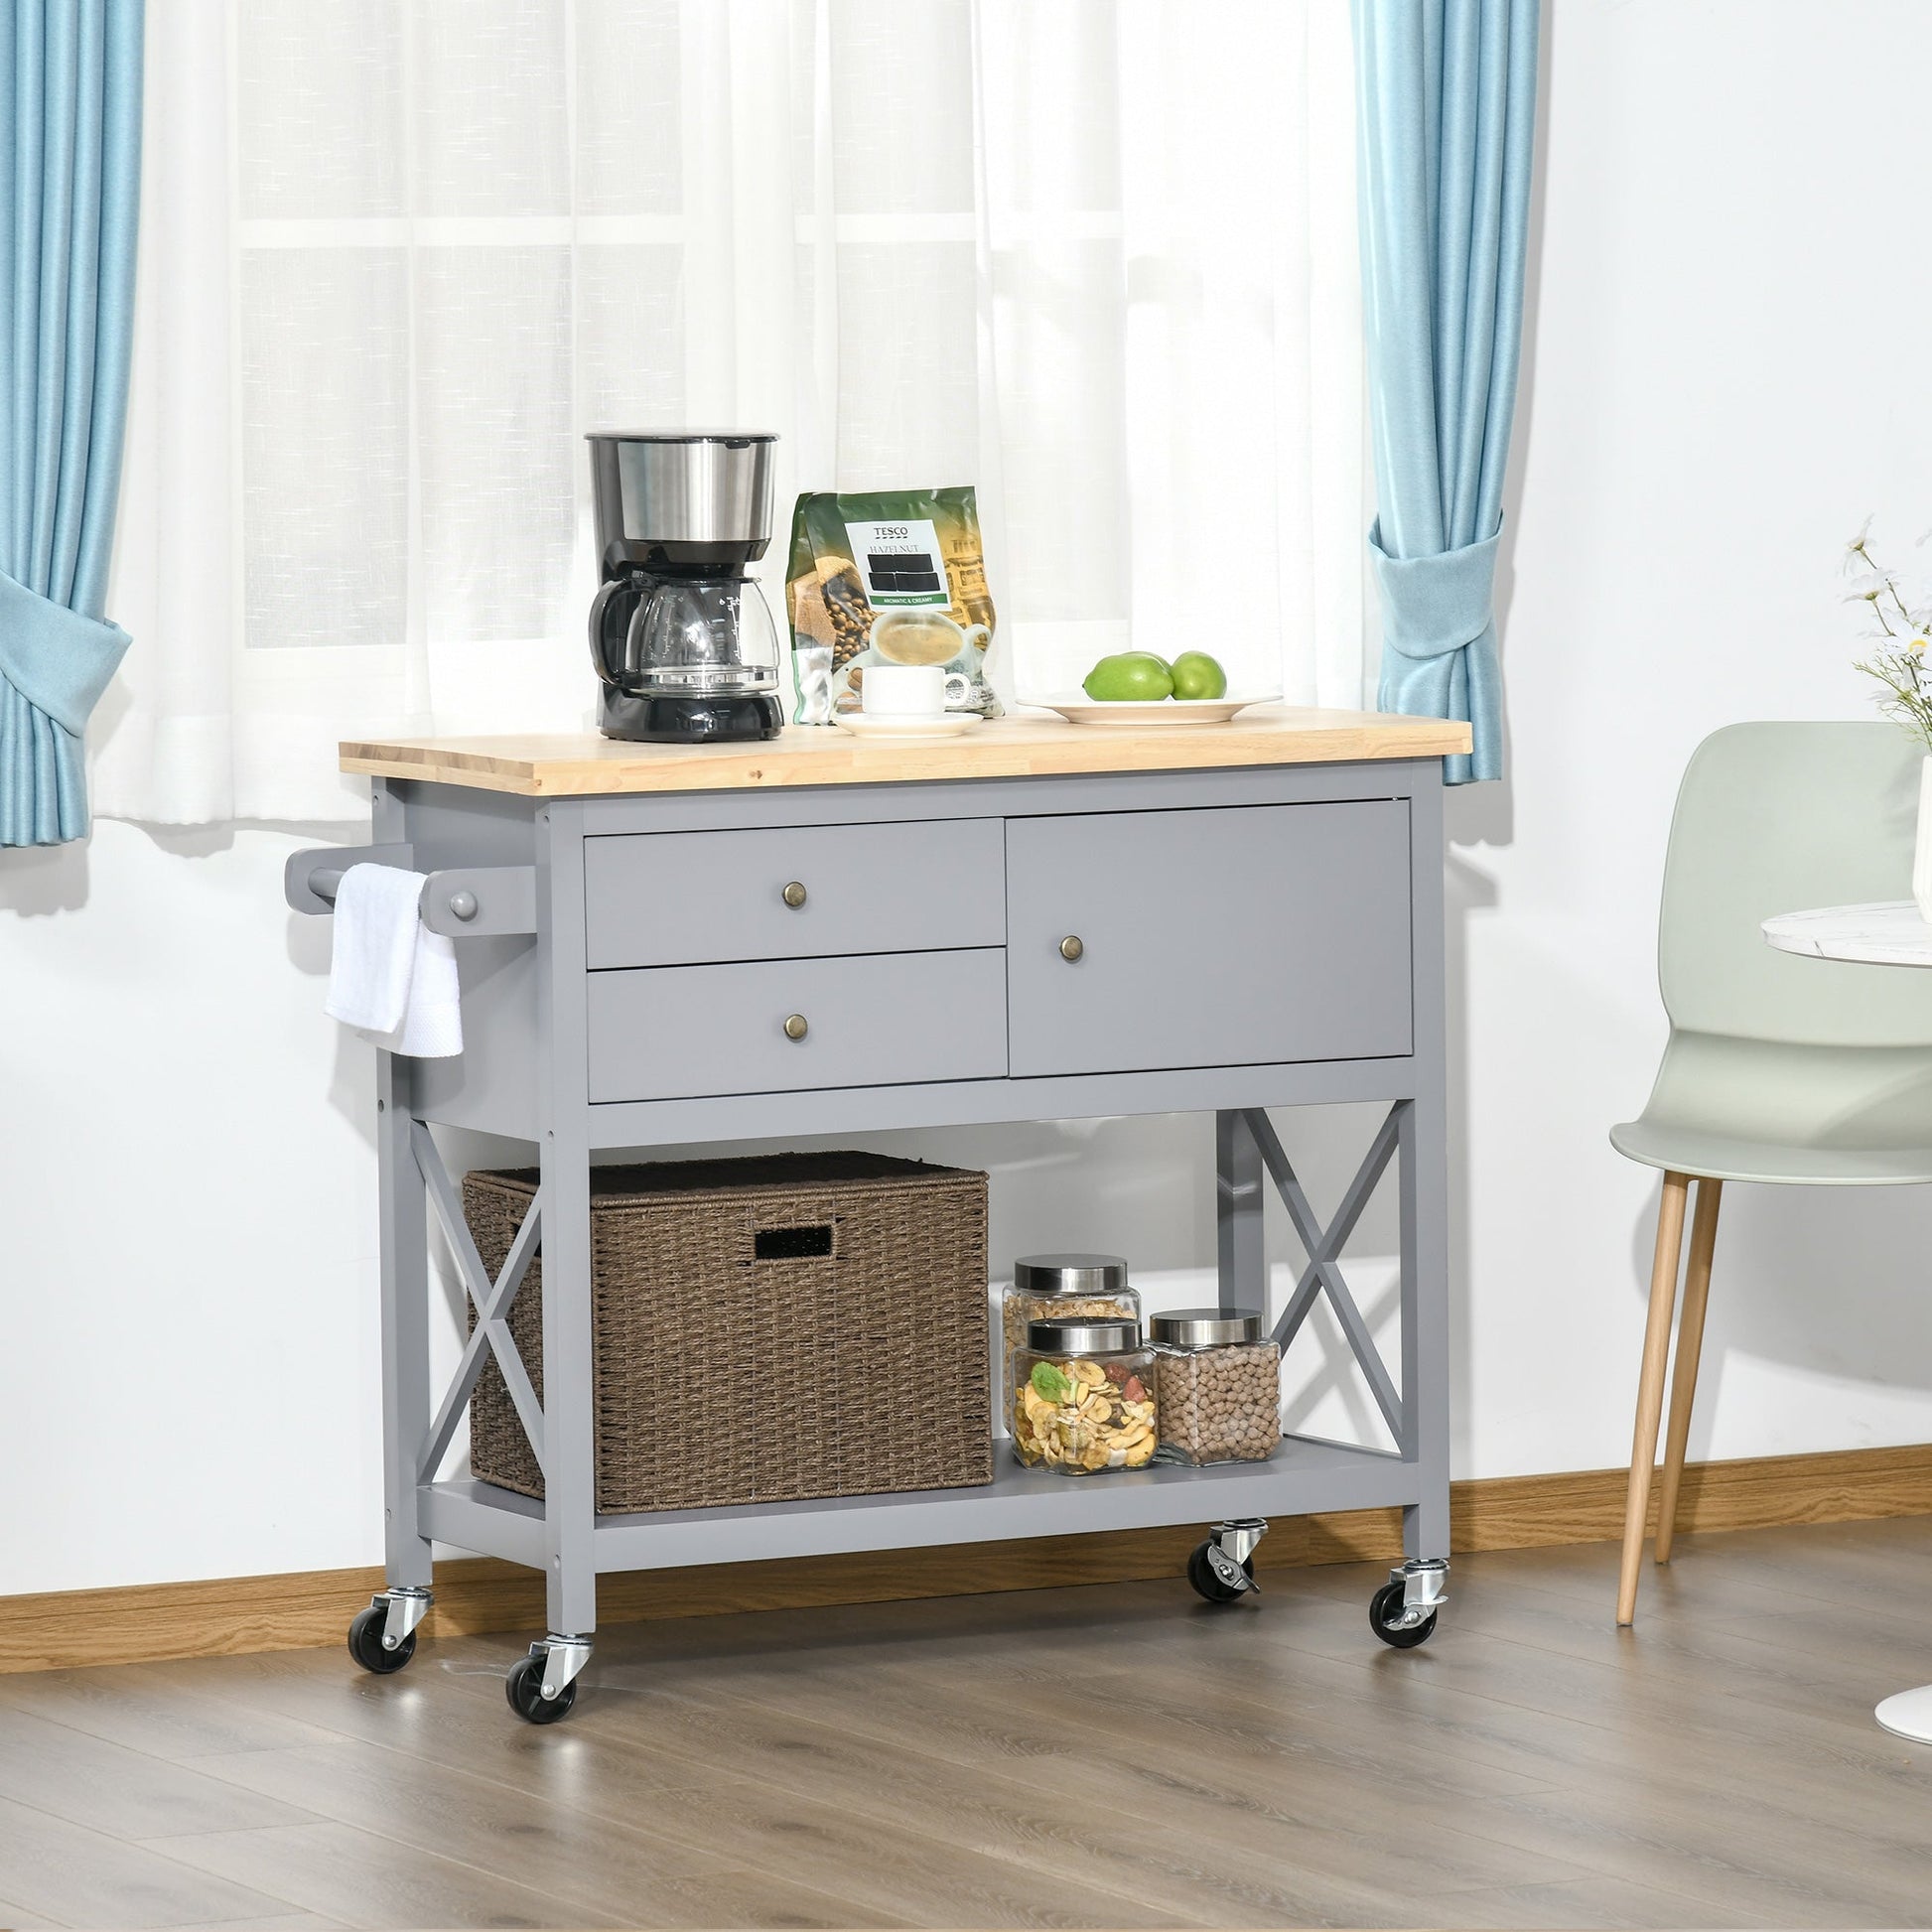 Utility Kitchen Cart Rolling Kitchen Island Storage Trolley with Rubberwood Top, 2 Drawers, Towel Rack, Gray - Gallery Canada